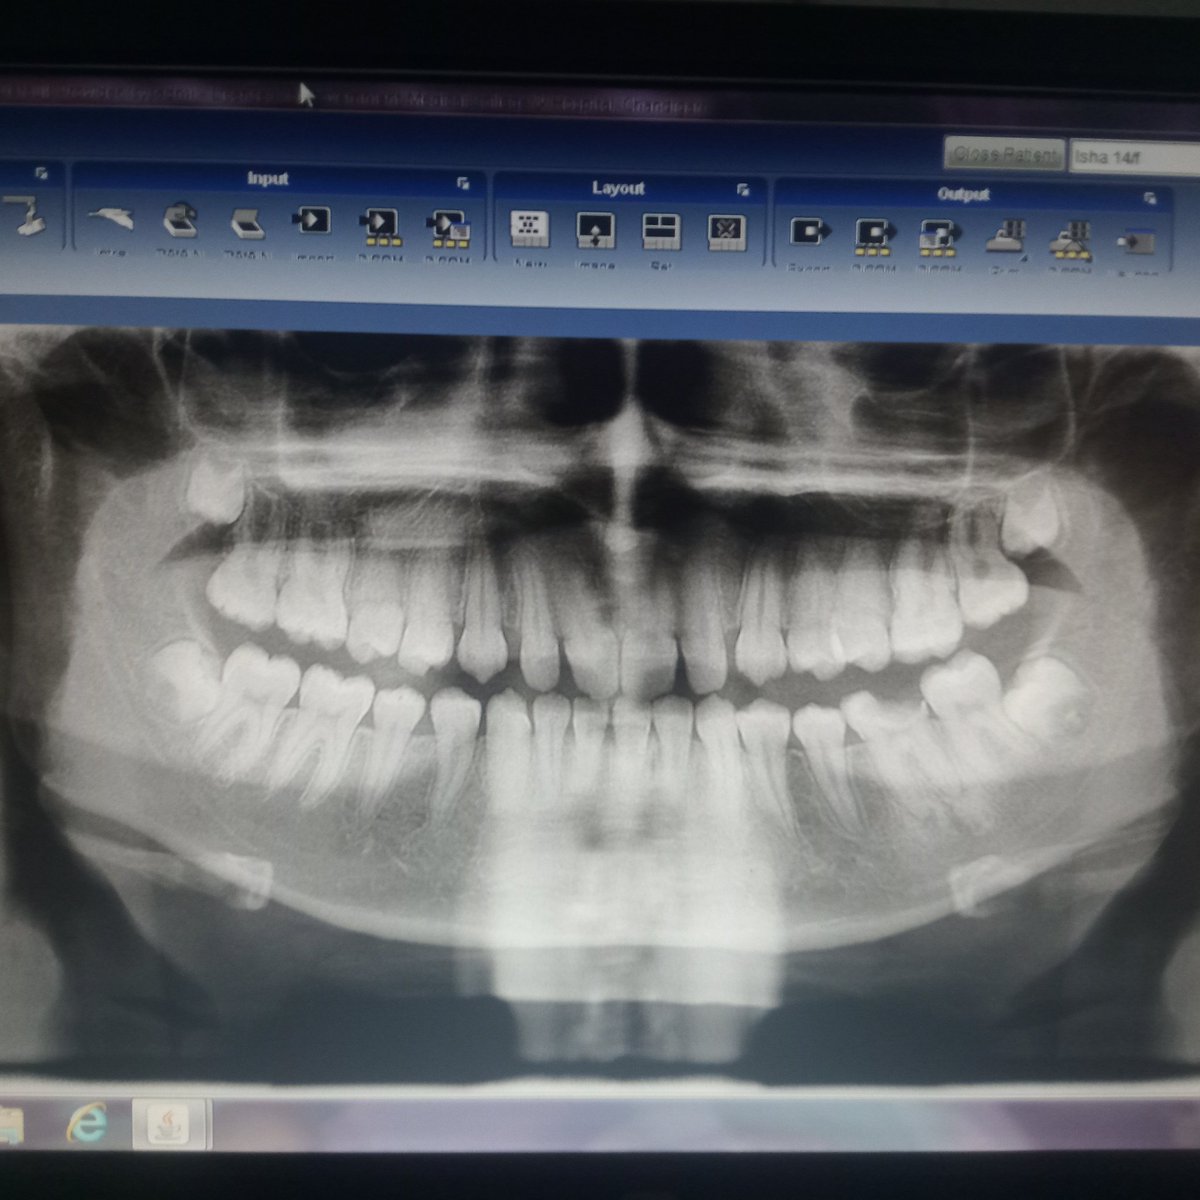 You can just click picture of X-RAY in your MOBILE PHONE  at Dental Department, Government Medical College and Hospital Sector 32 Chandigarh. No film is provided. How long you can save X-ray in mobile.
@MoHFW_INDIA @GMCH_CHD @chandigarh_admn @HinaRohtaki @ManishTewari